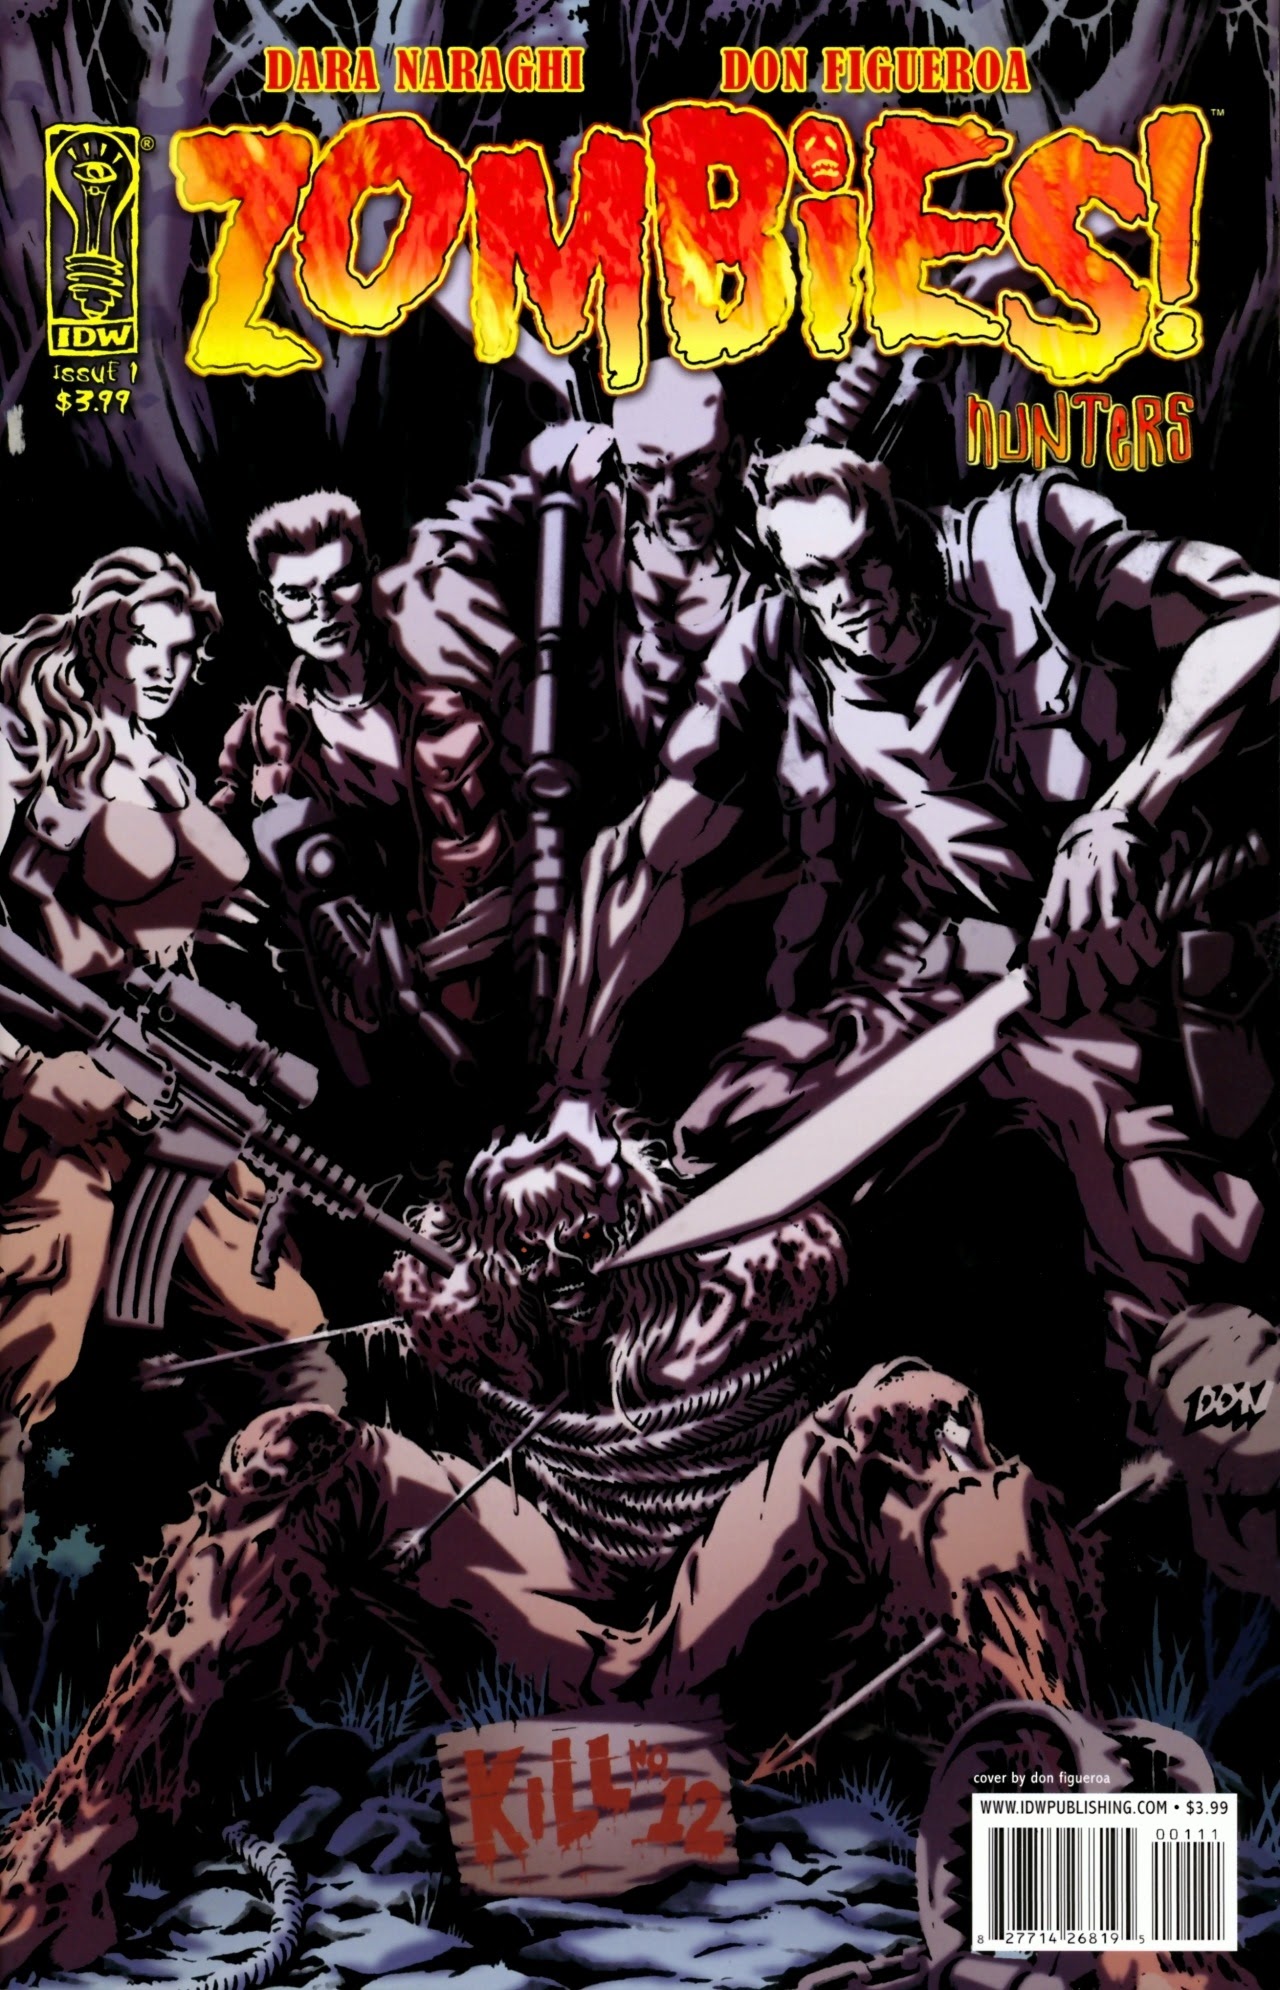 Read online Zombies!: Hunters comic -  Issue # Full - 1